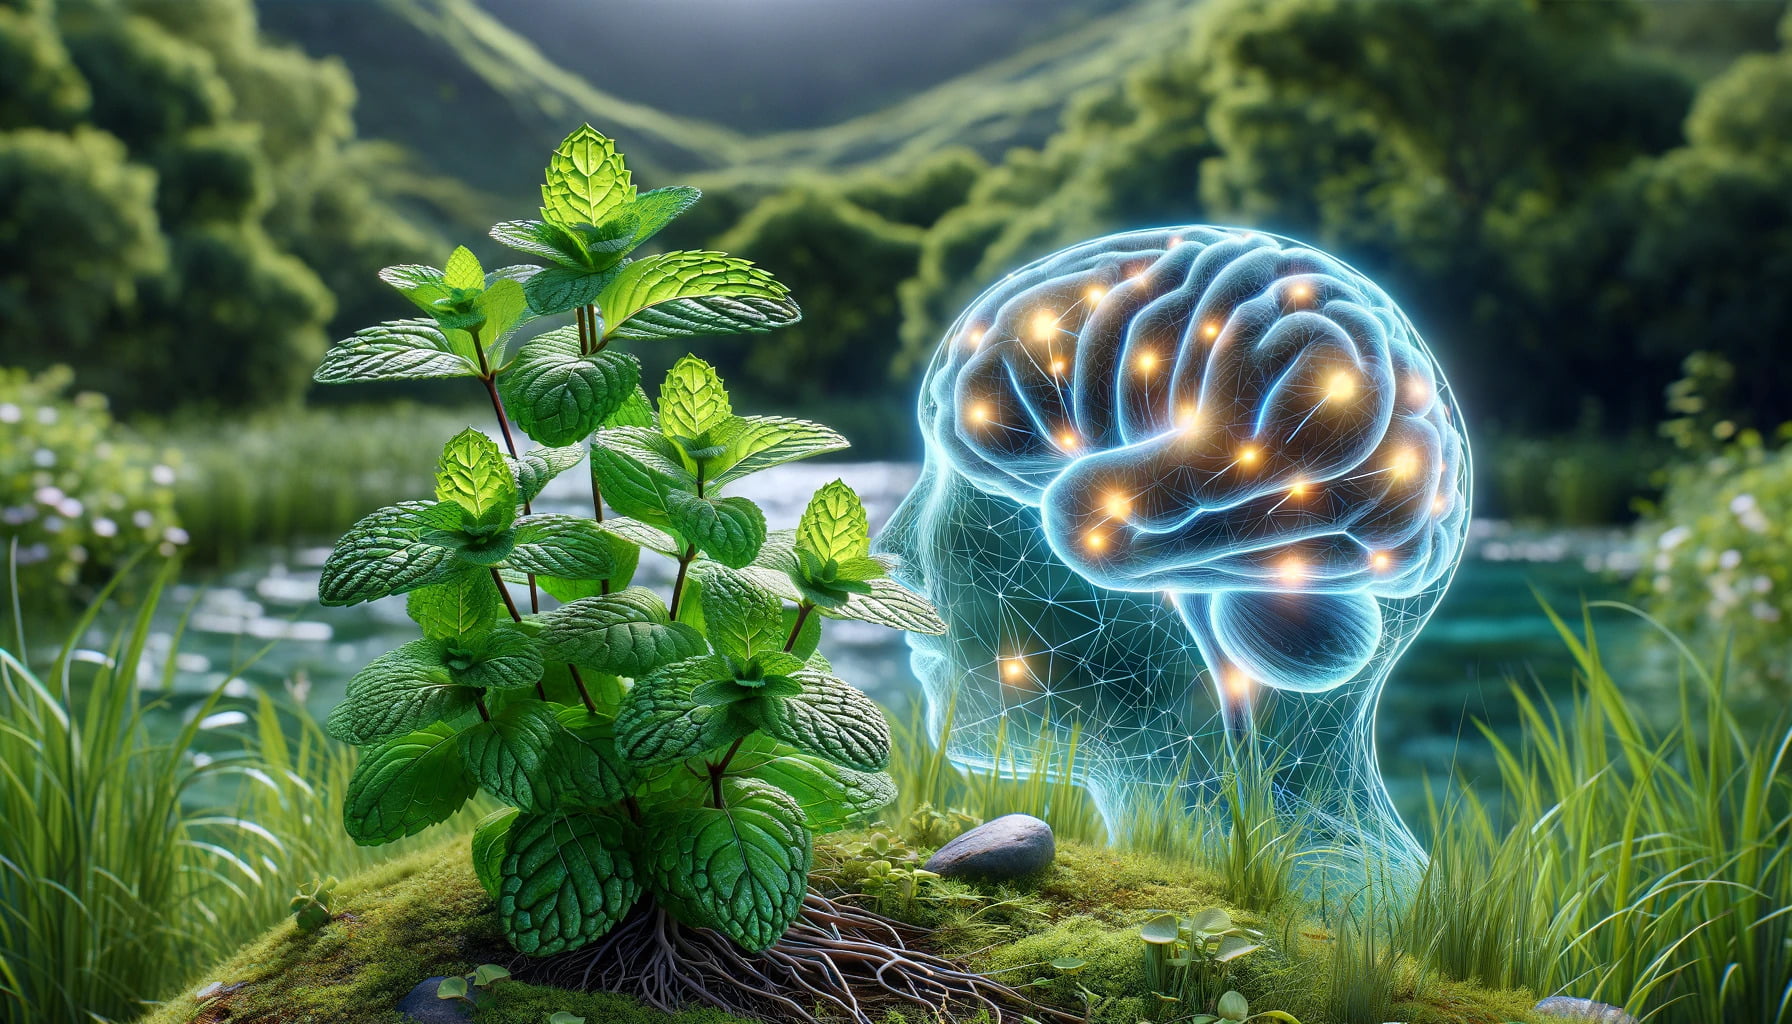 A photorealistic image of a peppermint plant alongside a depiction of its cognitive enhancing effects on the brain, in a landscape format.